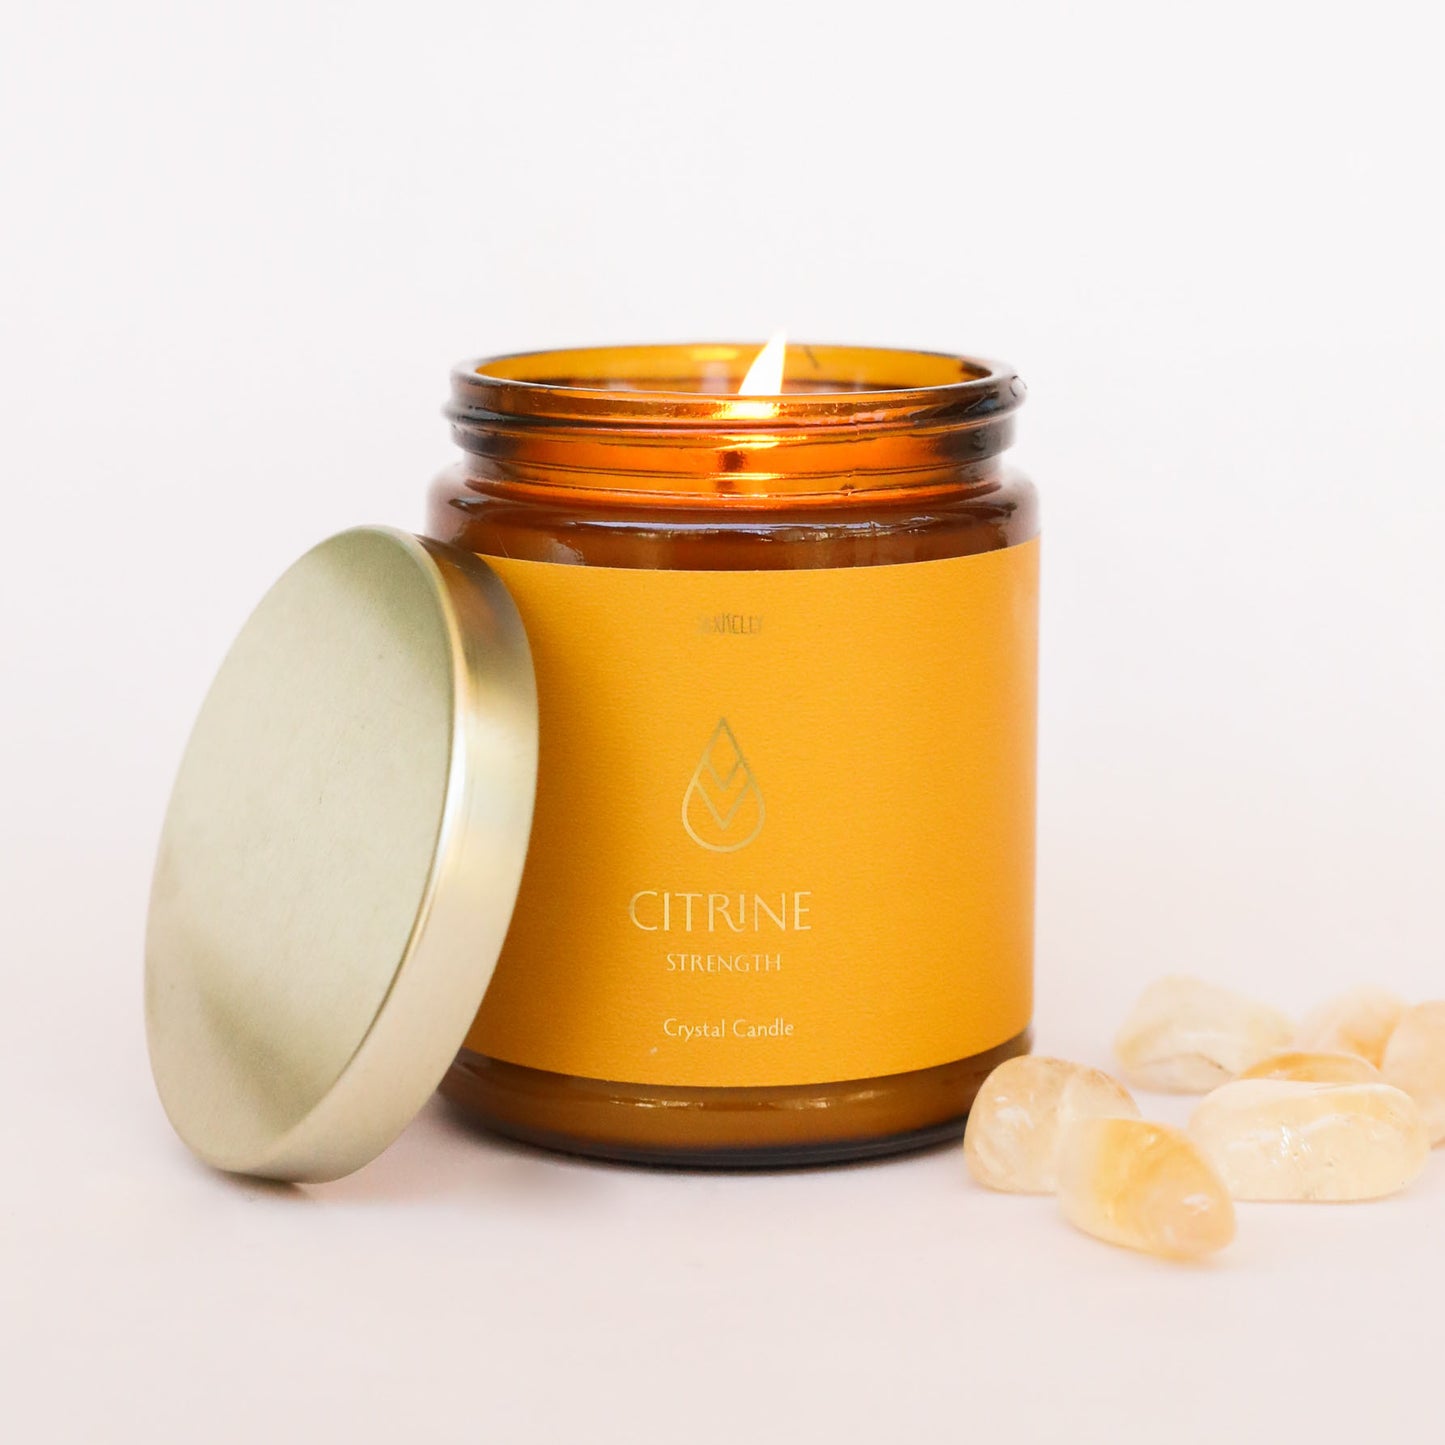 Amber Crystal Candle - Citrine